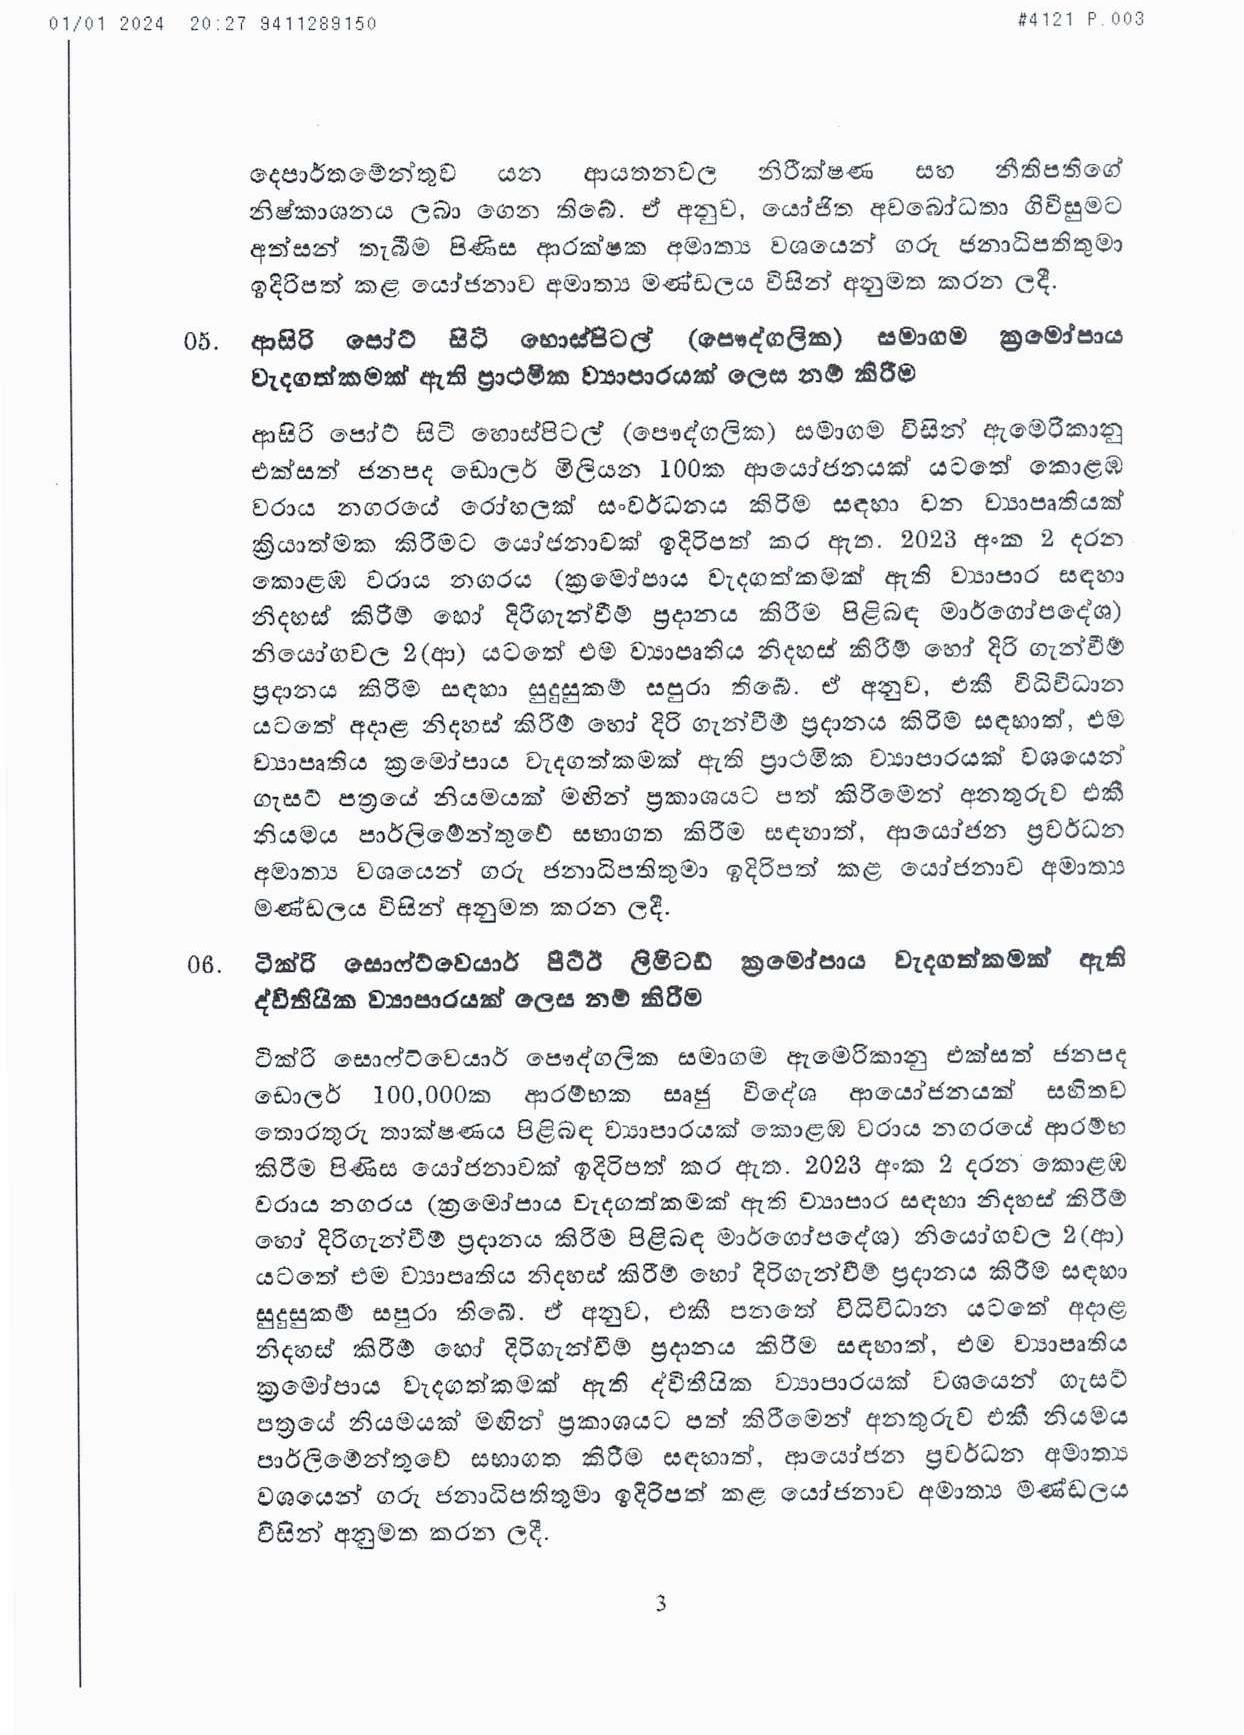 Cabinet Decision on 01.01.2024 page 003